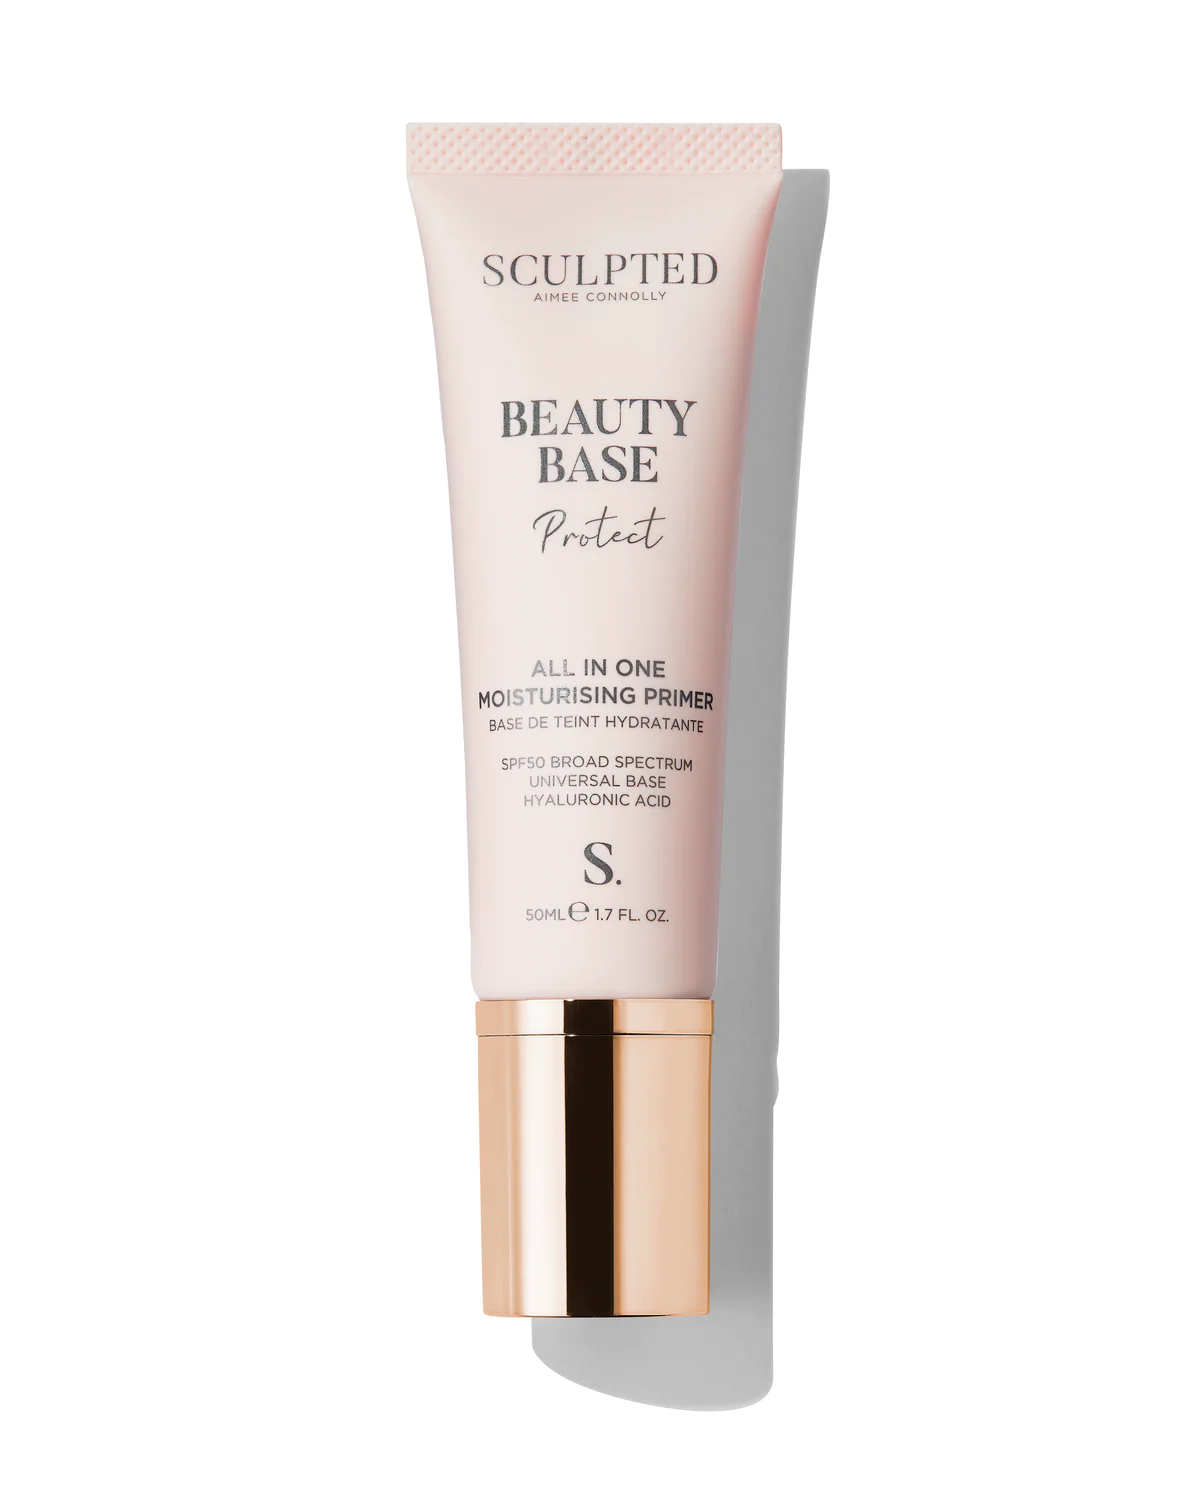 Sculpted By Aimee Connolly Beauty Base Protect All In One Moisturising Primer